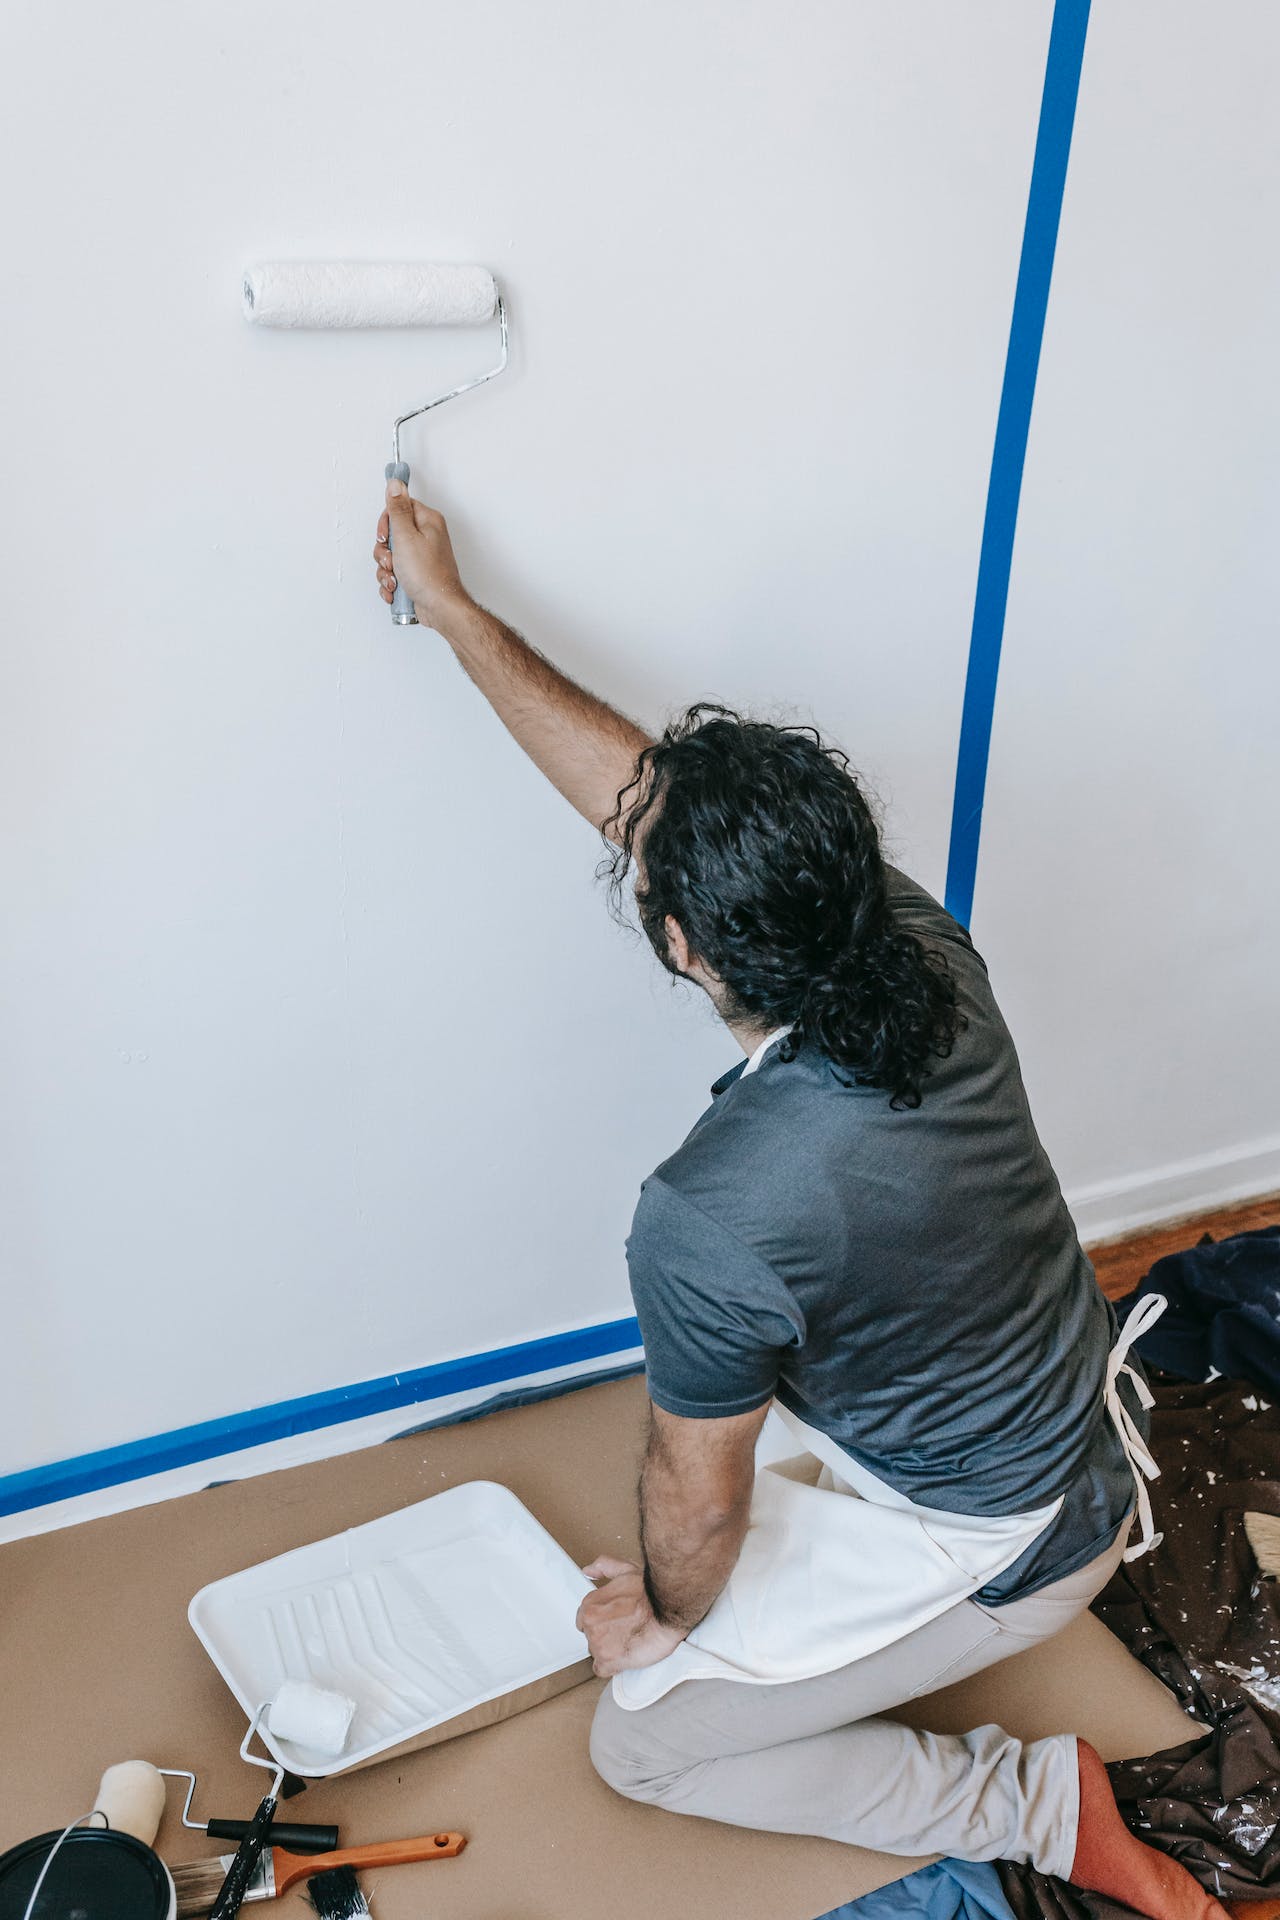 professional painting wall